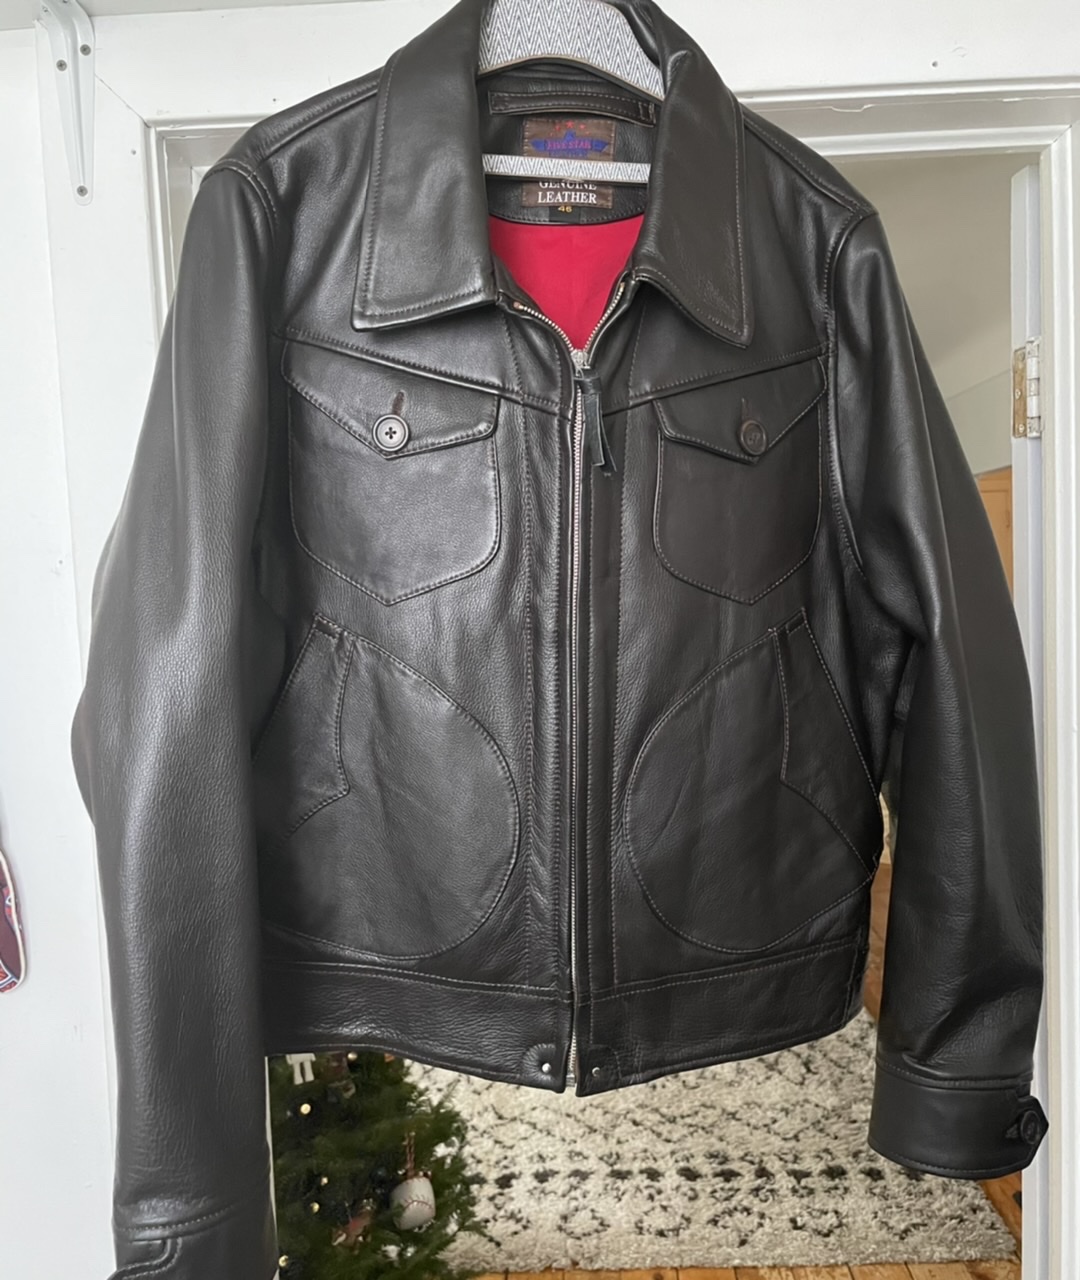 2 x 5 Star leather “fit jackets” Free! | The Fedora Lounge